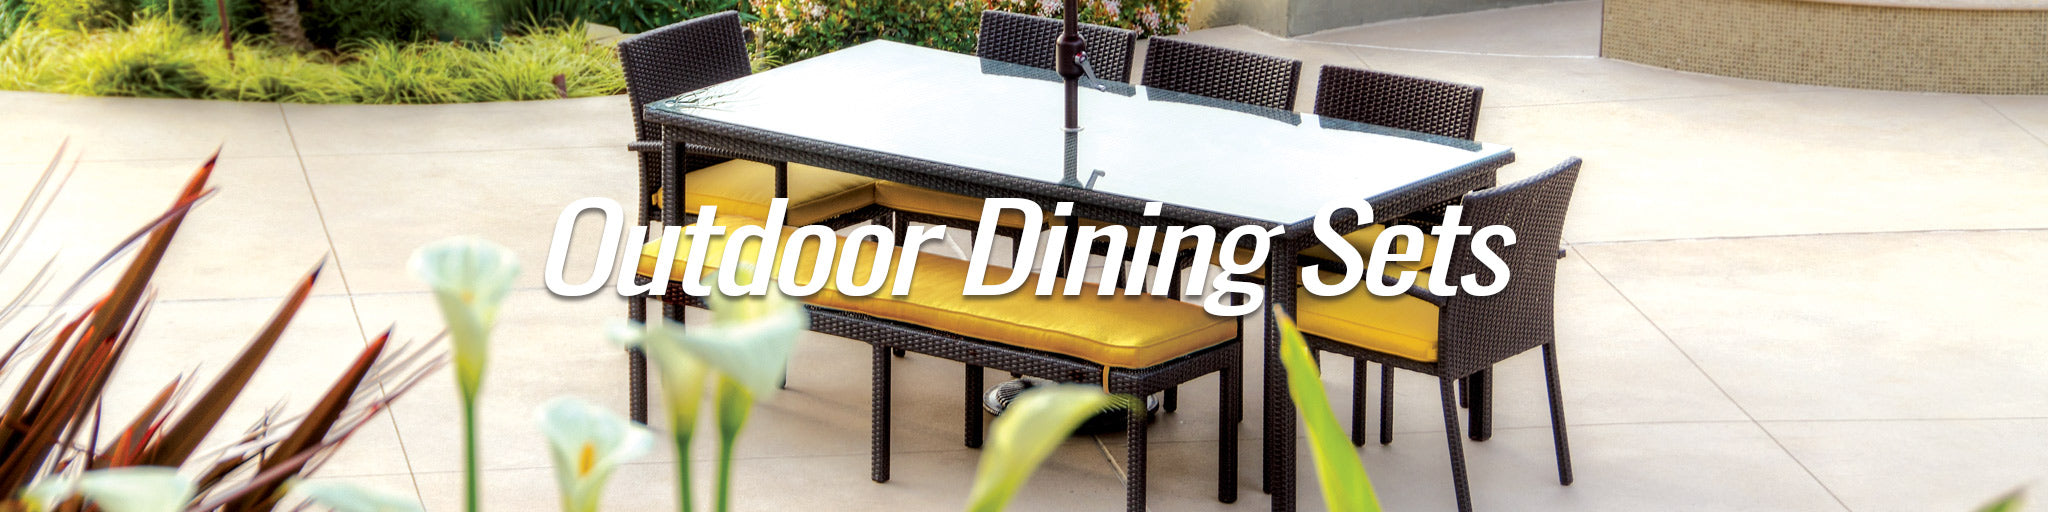 OUTDOOR DINING SETS